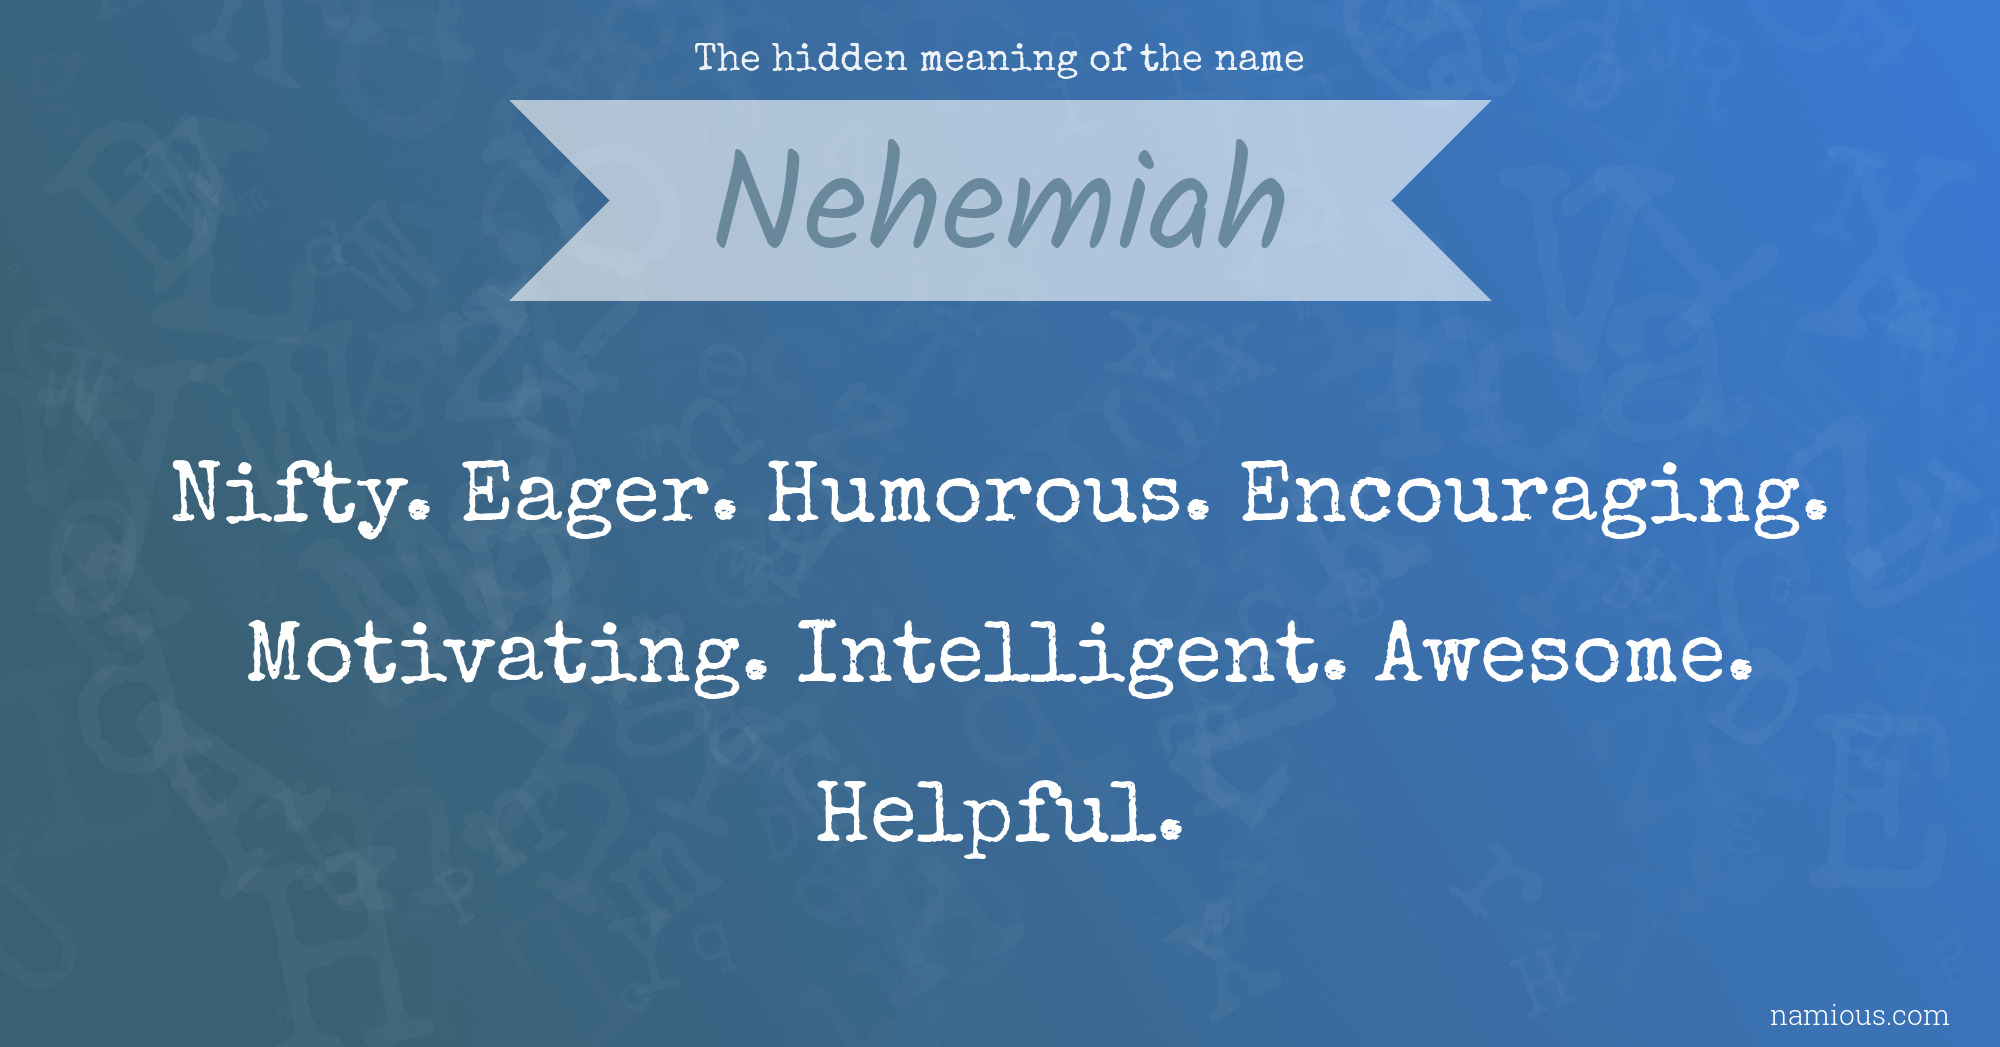 The hidden meaning of the name Nehemiah